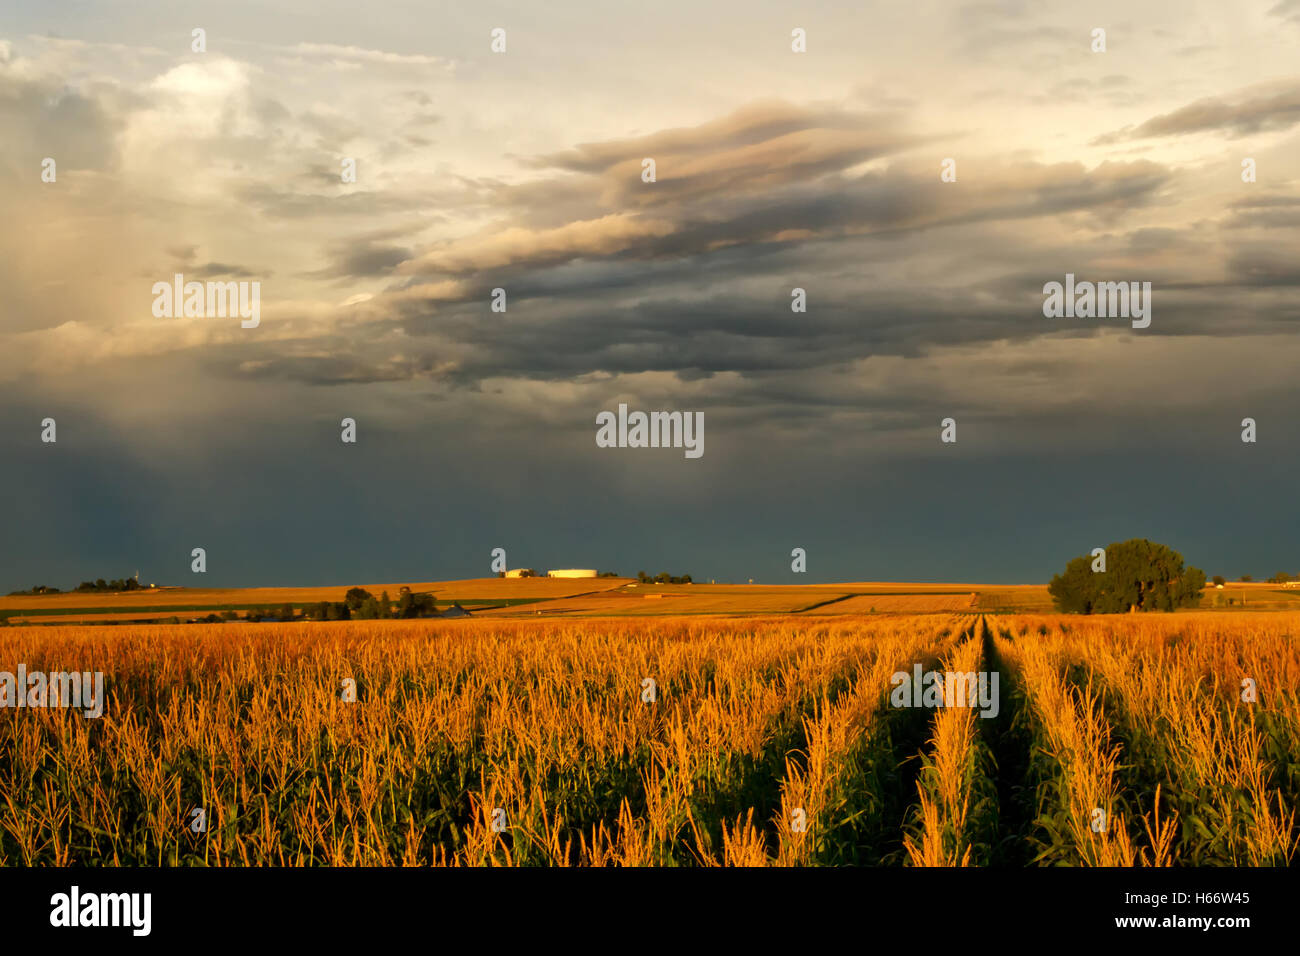 Violent storm clouds over a corn field at sunset Stock Photo